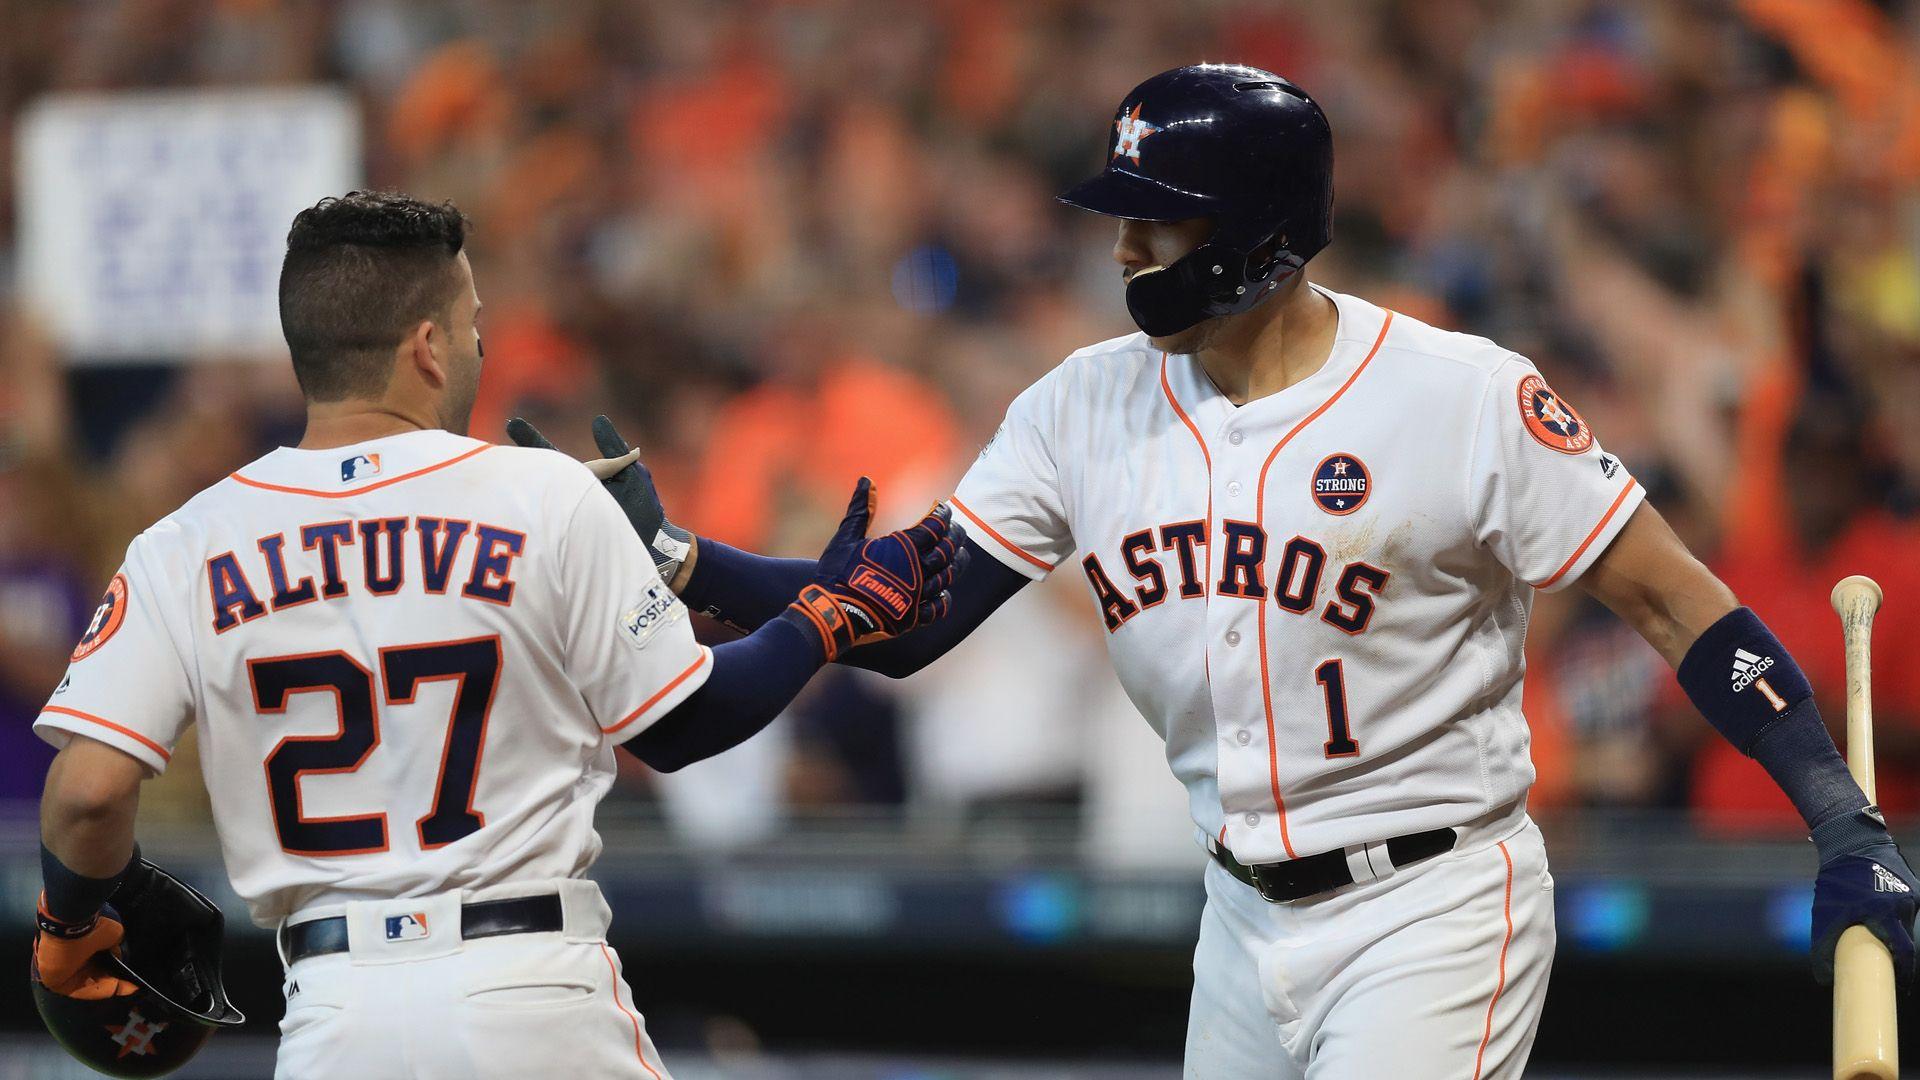 MLB playoffs: Three takeaways from Astros' ALDS Game 1 win over